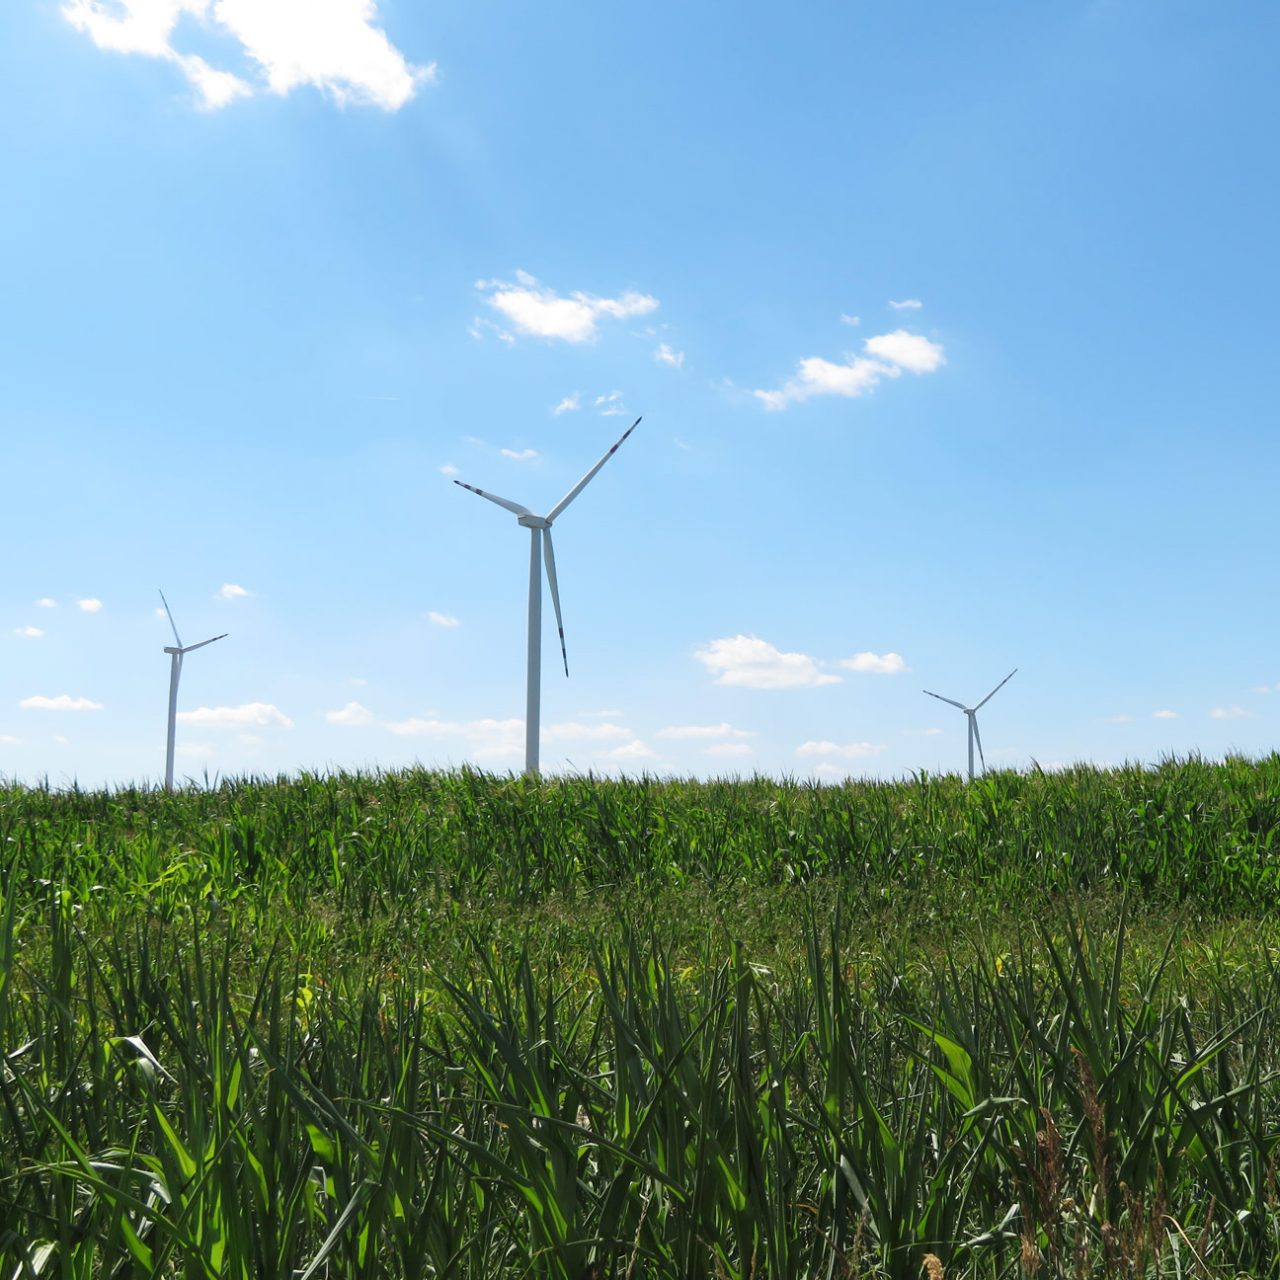 Three wind turbines seen from below against blue sky, with green grass in foreground 